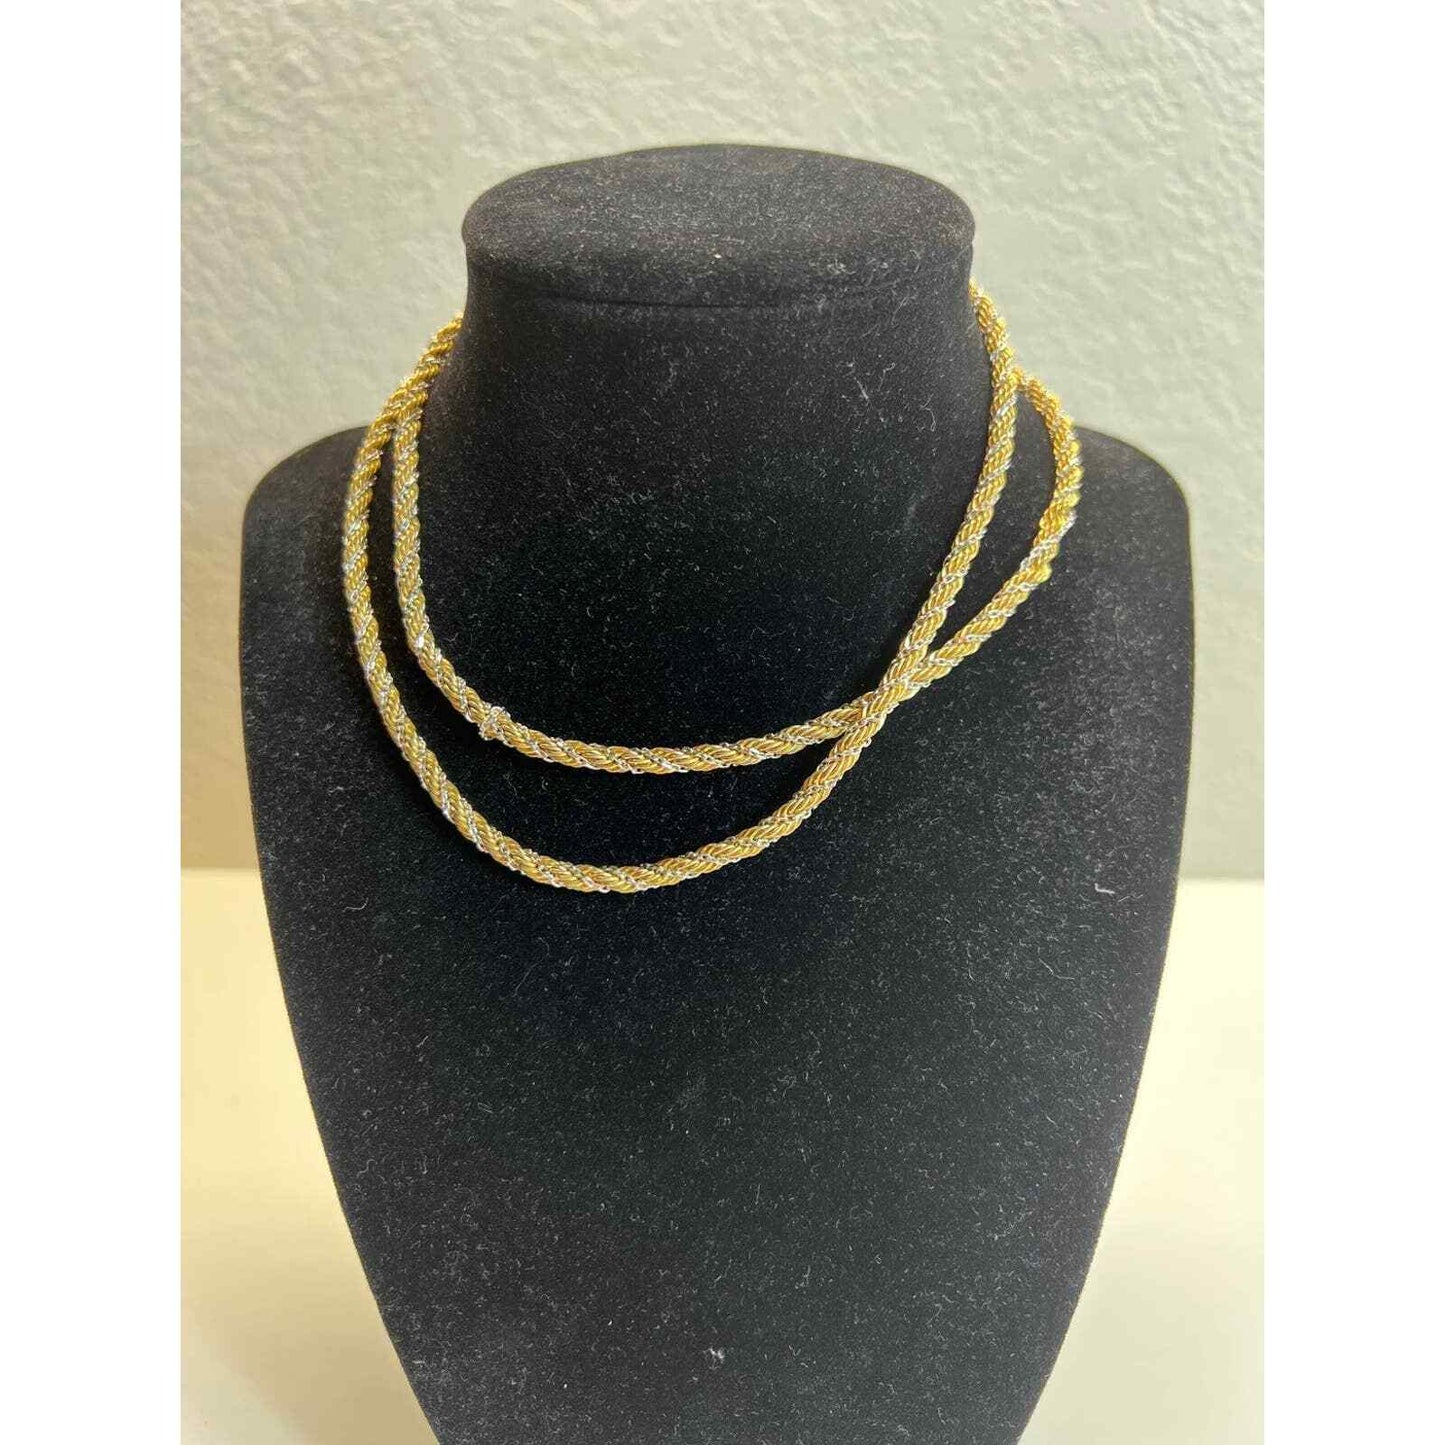 Monet Necklace Rope Chain 2 Tone Gold And Silver Tone 27" Long Hang Tag Vintage